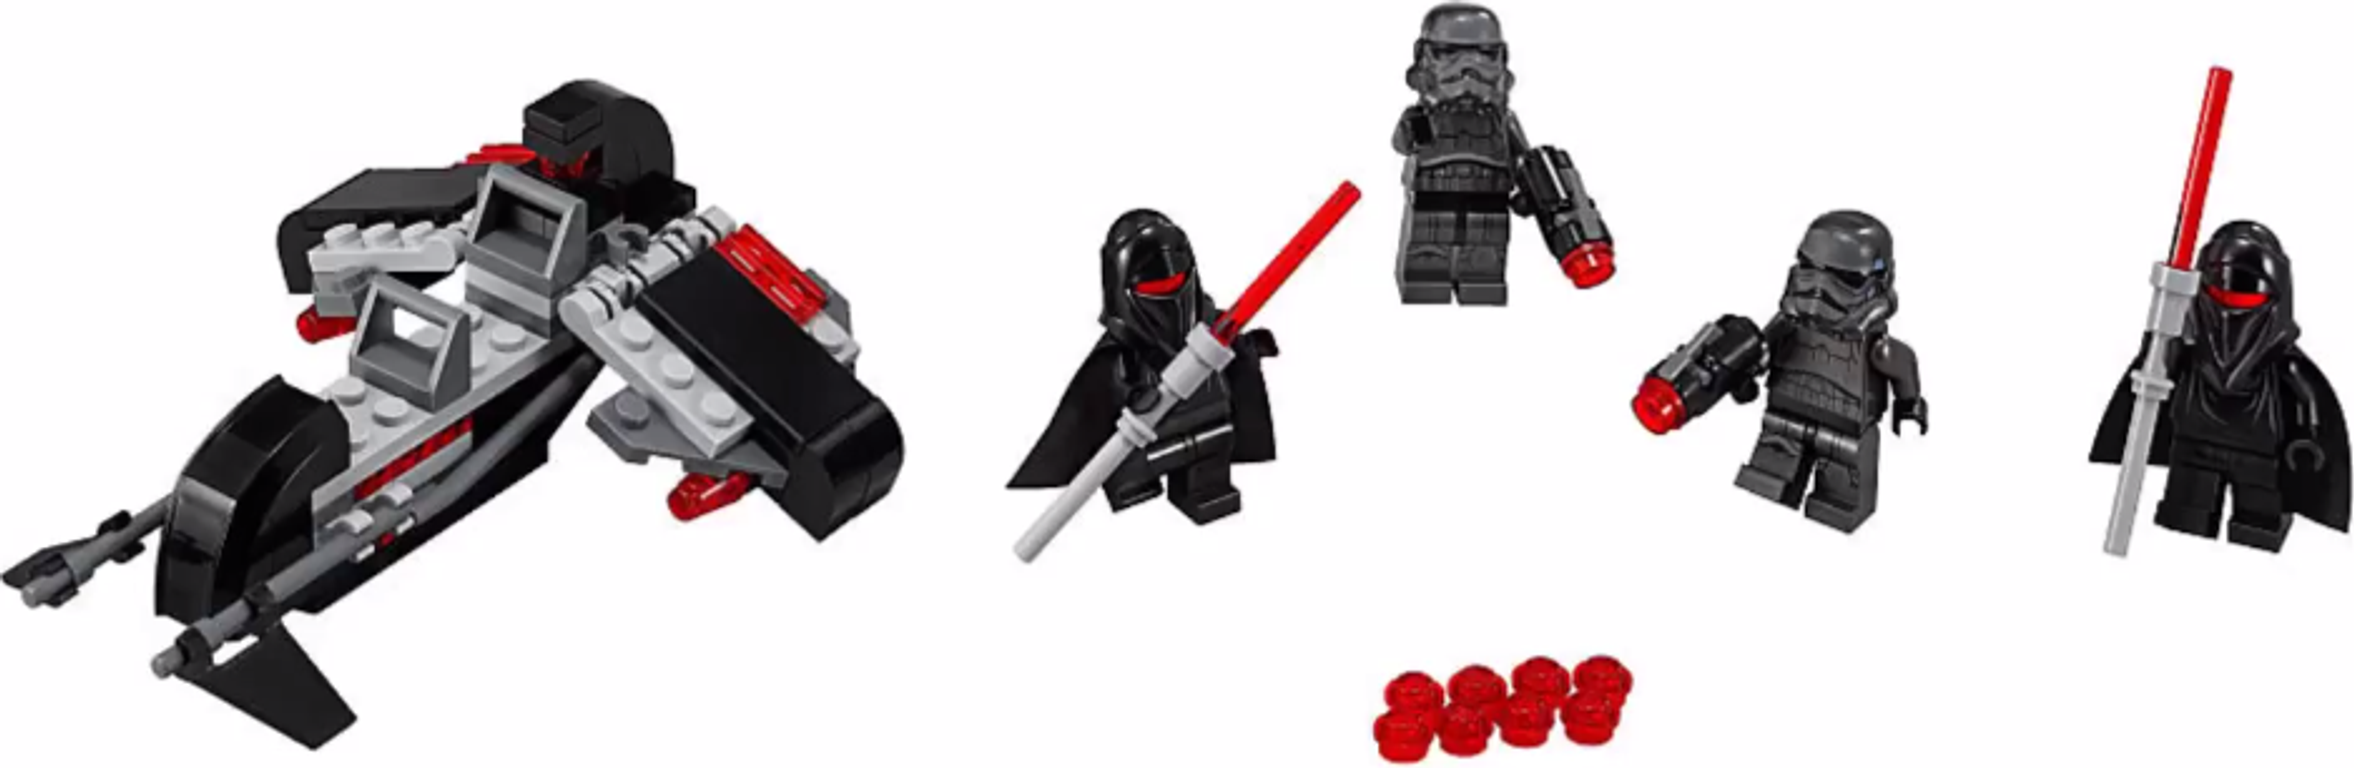 LEGO® Star Wars Shadow Troopers™ components